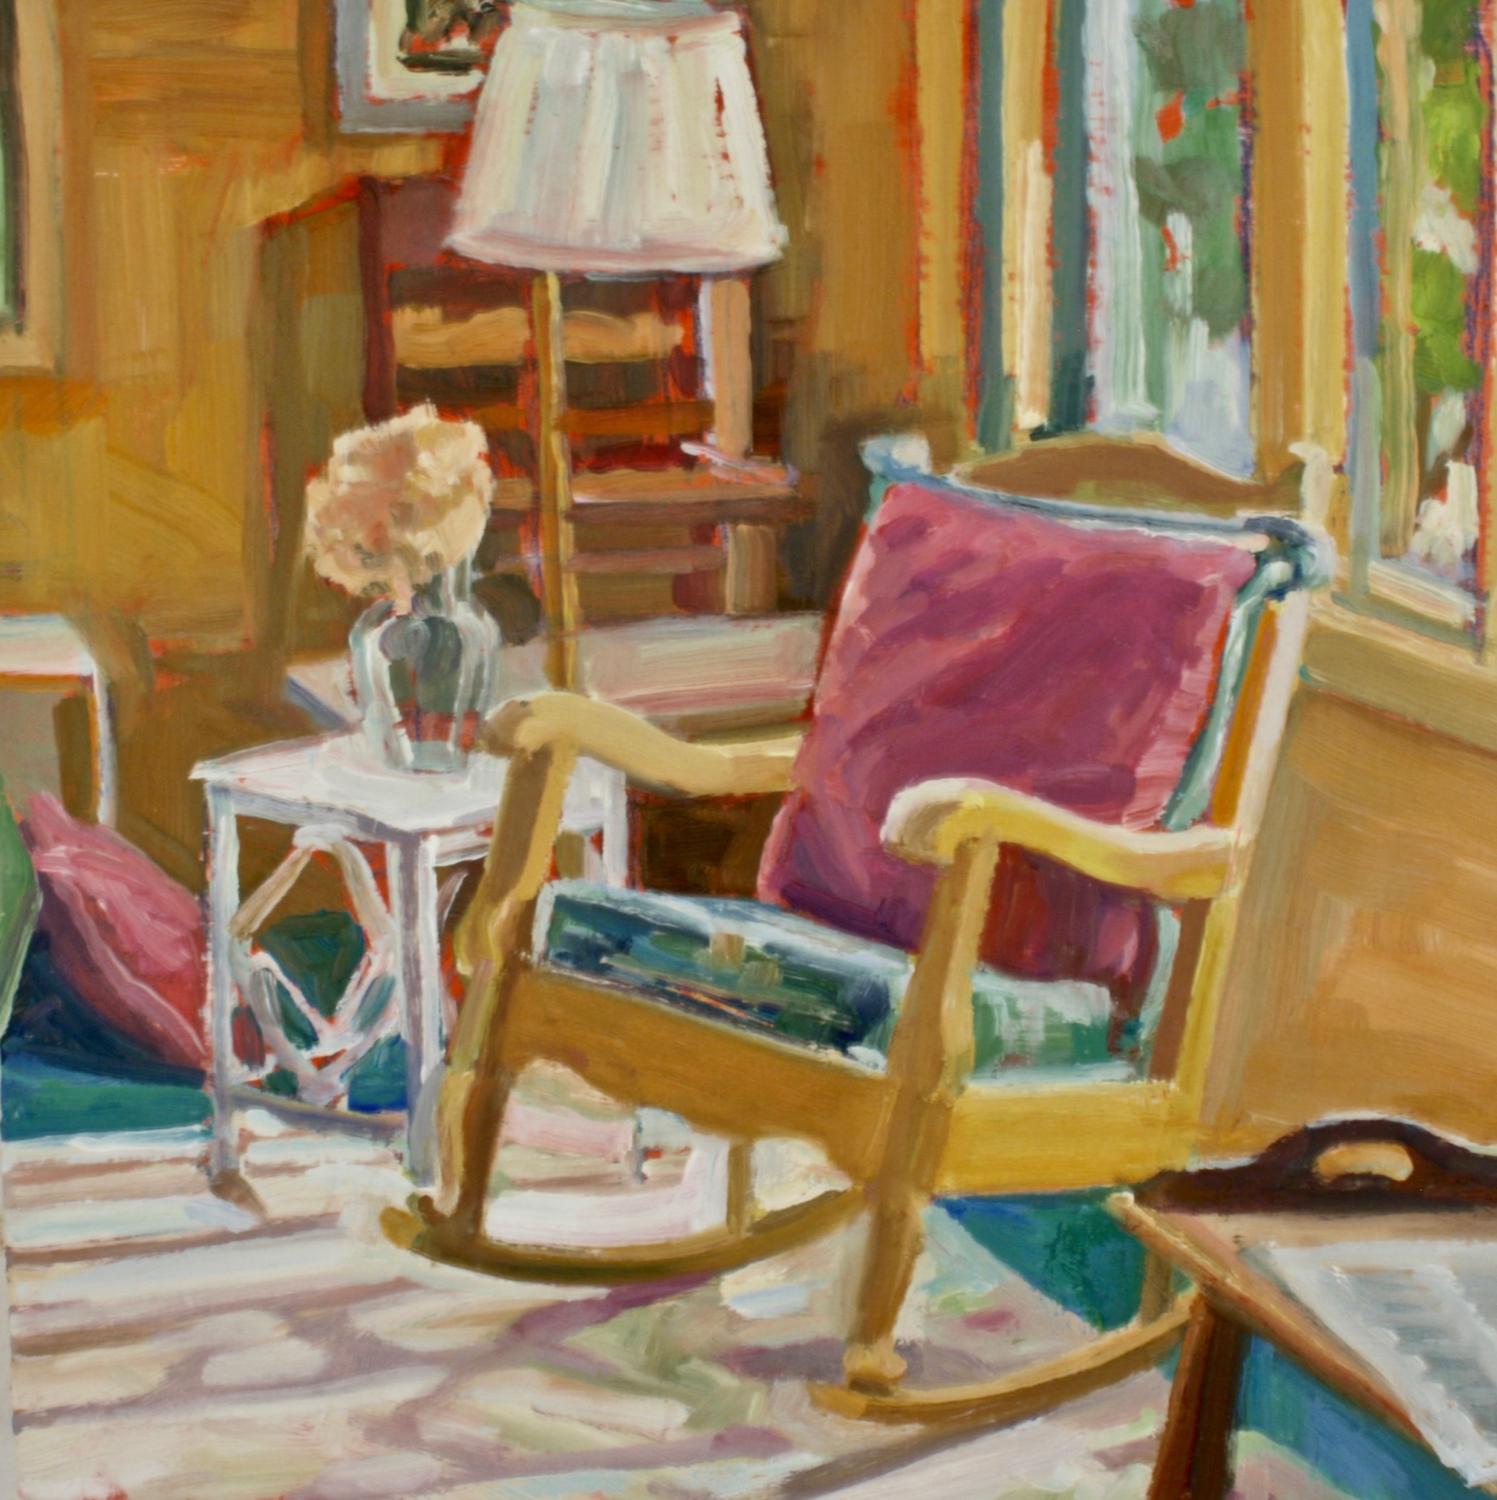 "Lanni's Rental", interiors, high chroma, vibrant, oil painting - Painting by Jill Pottle